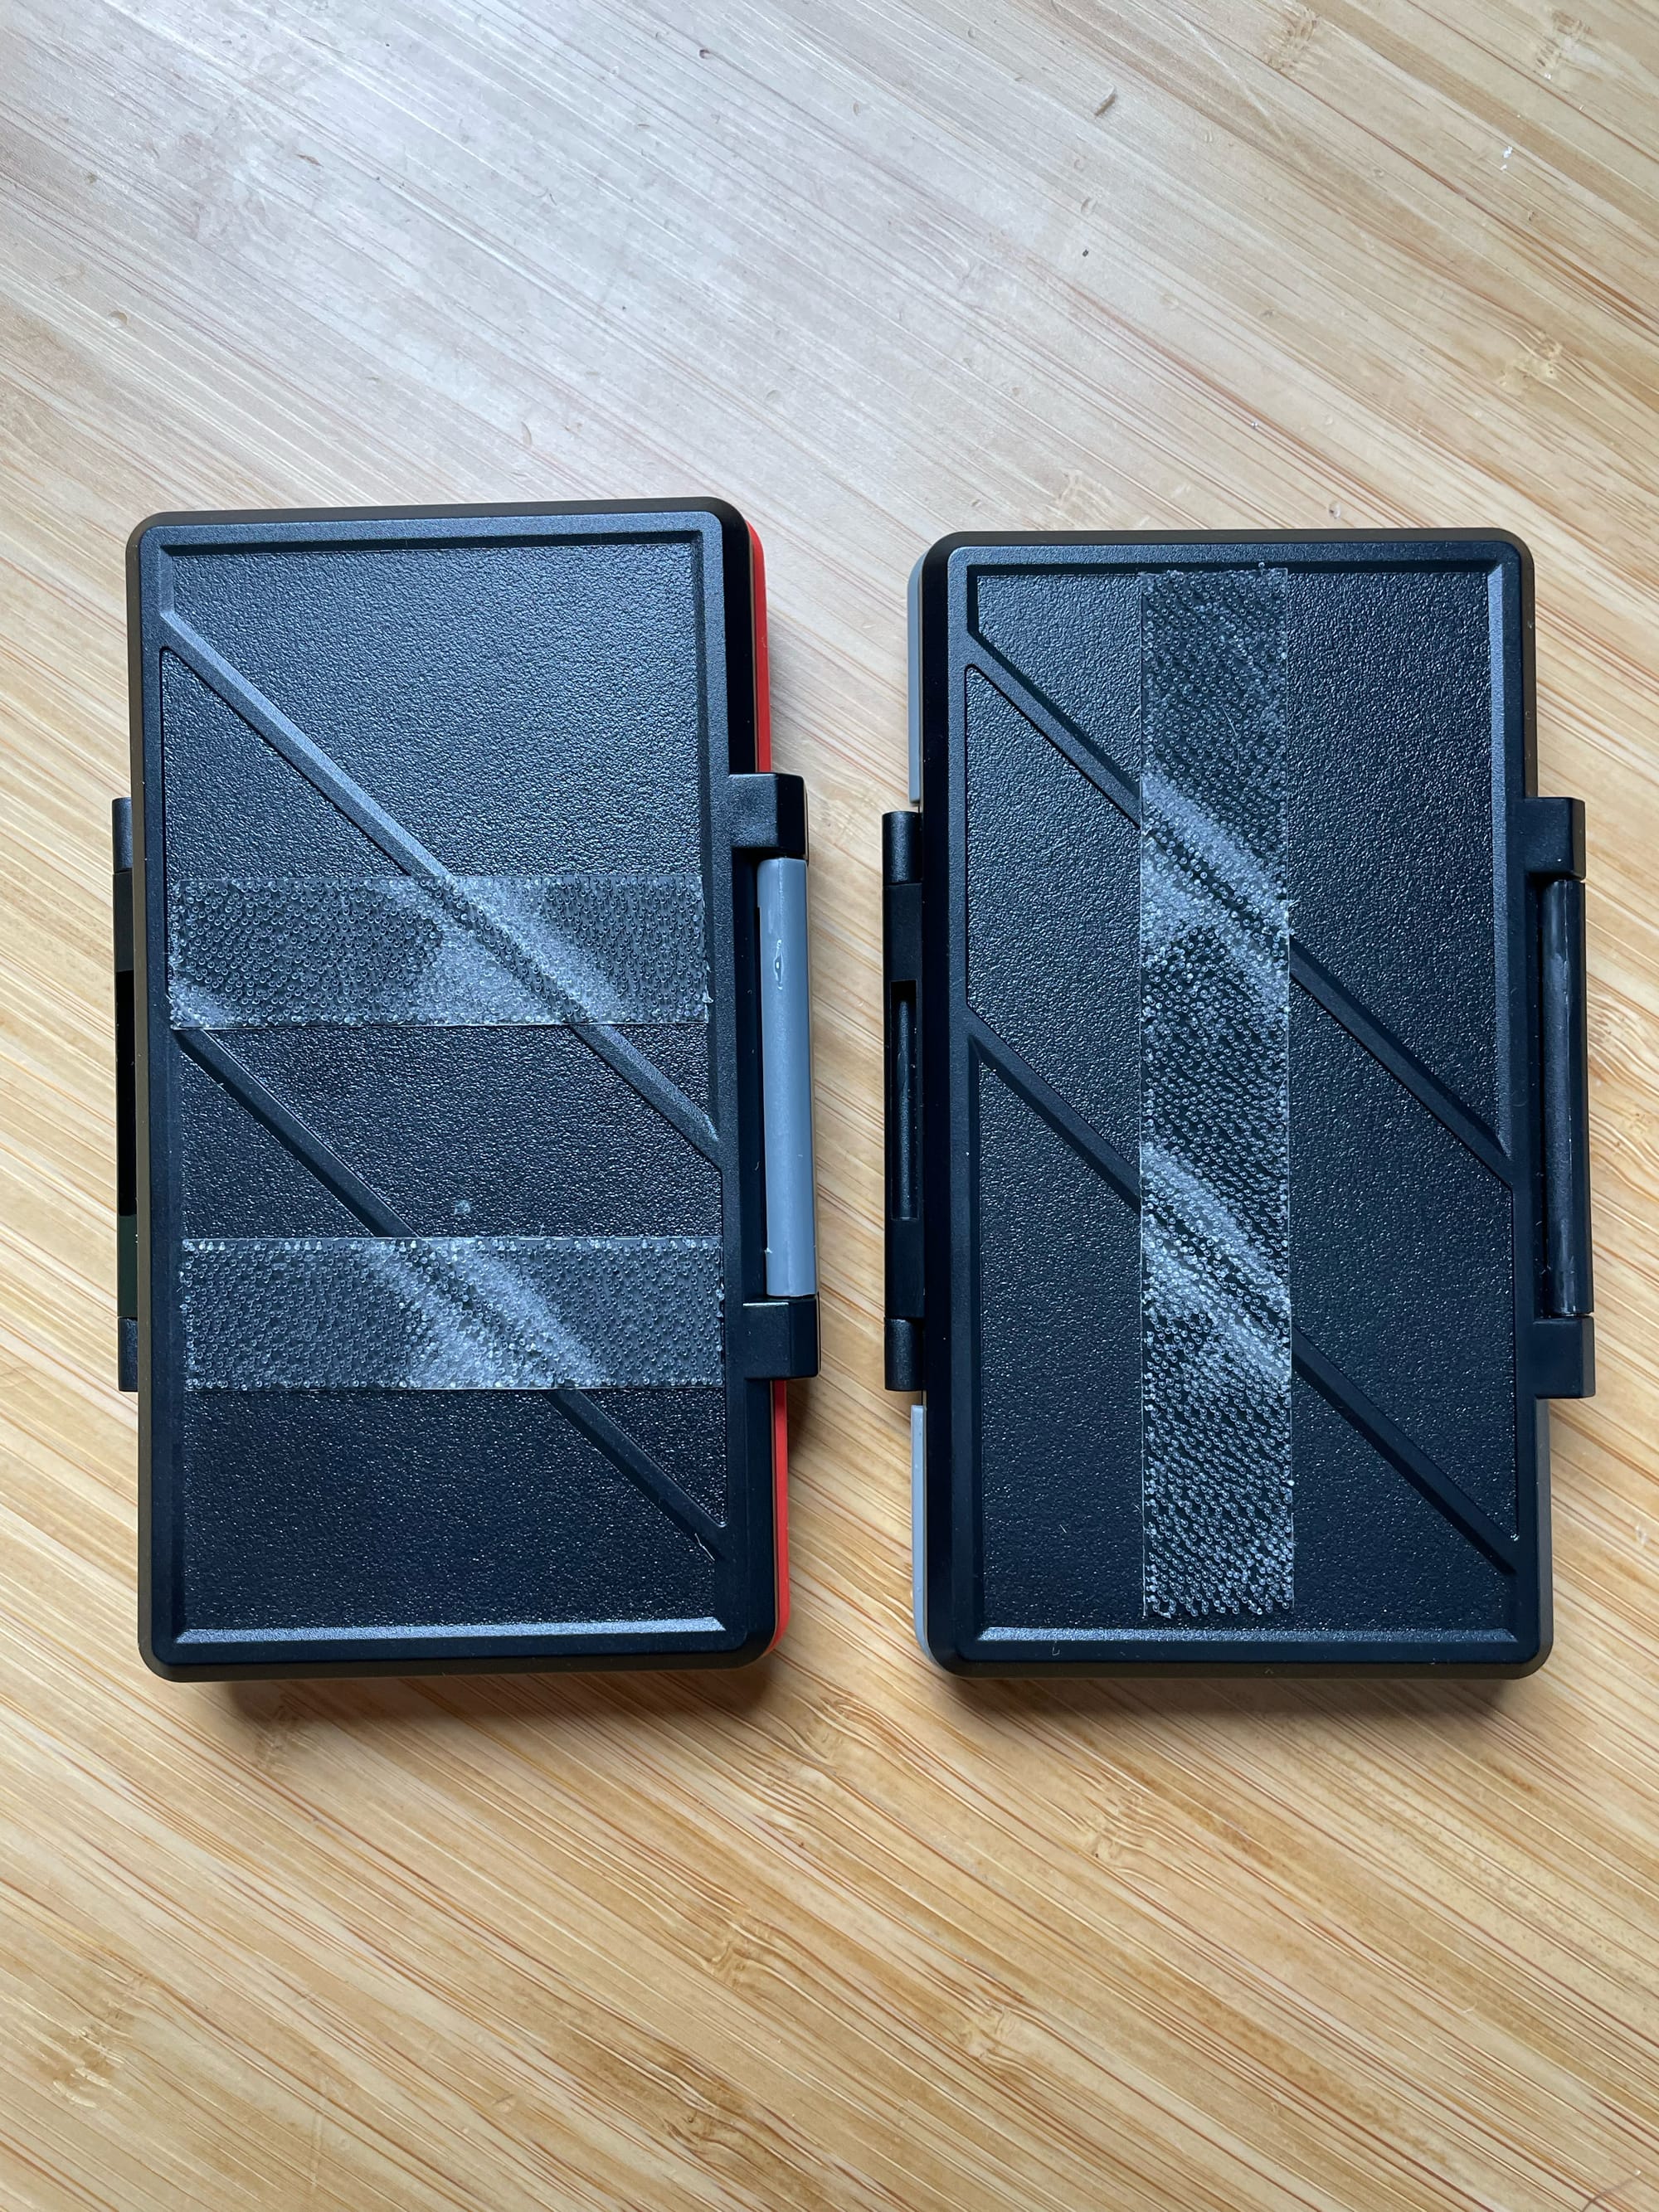 Stop using Velcro on your SSDs!